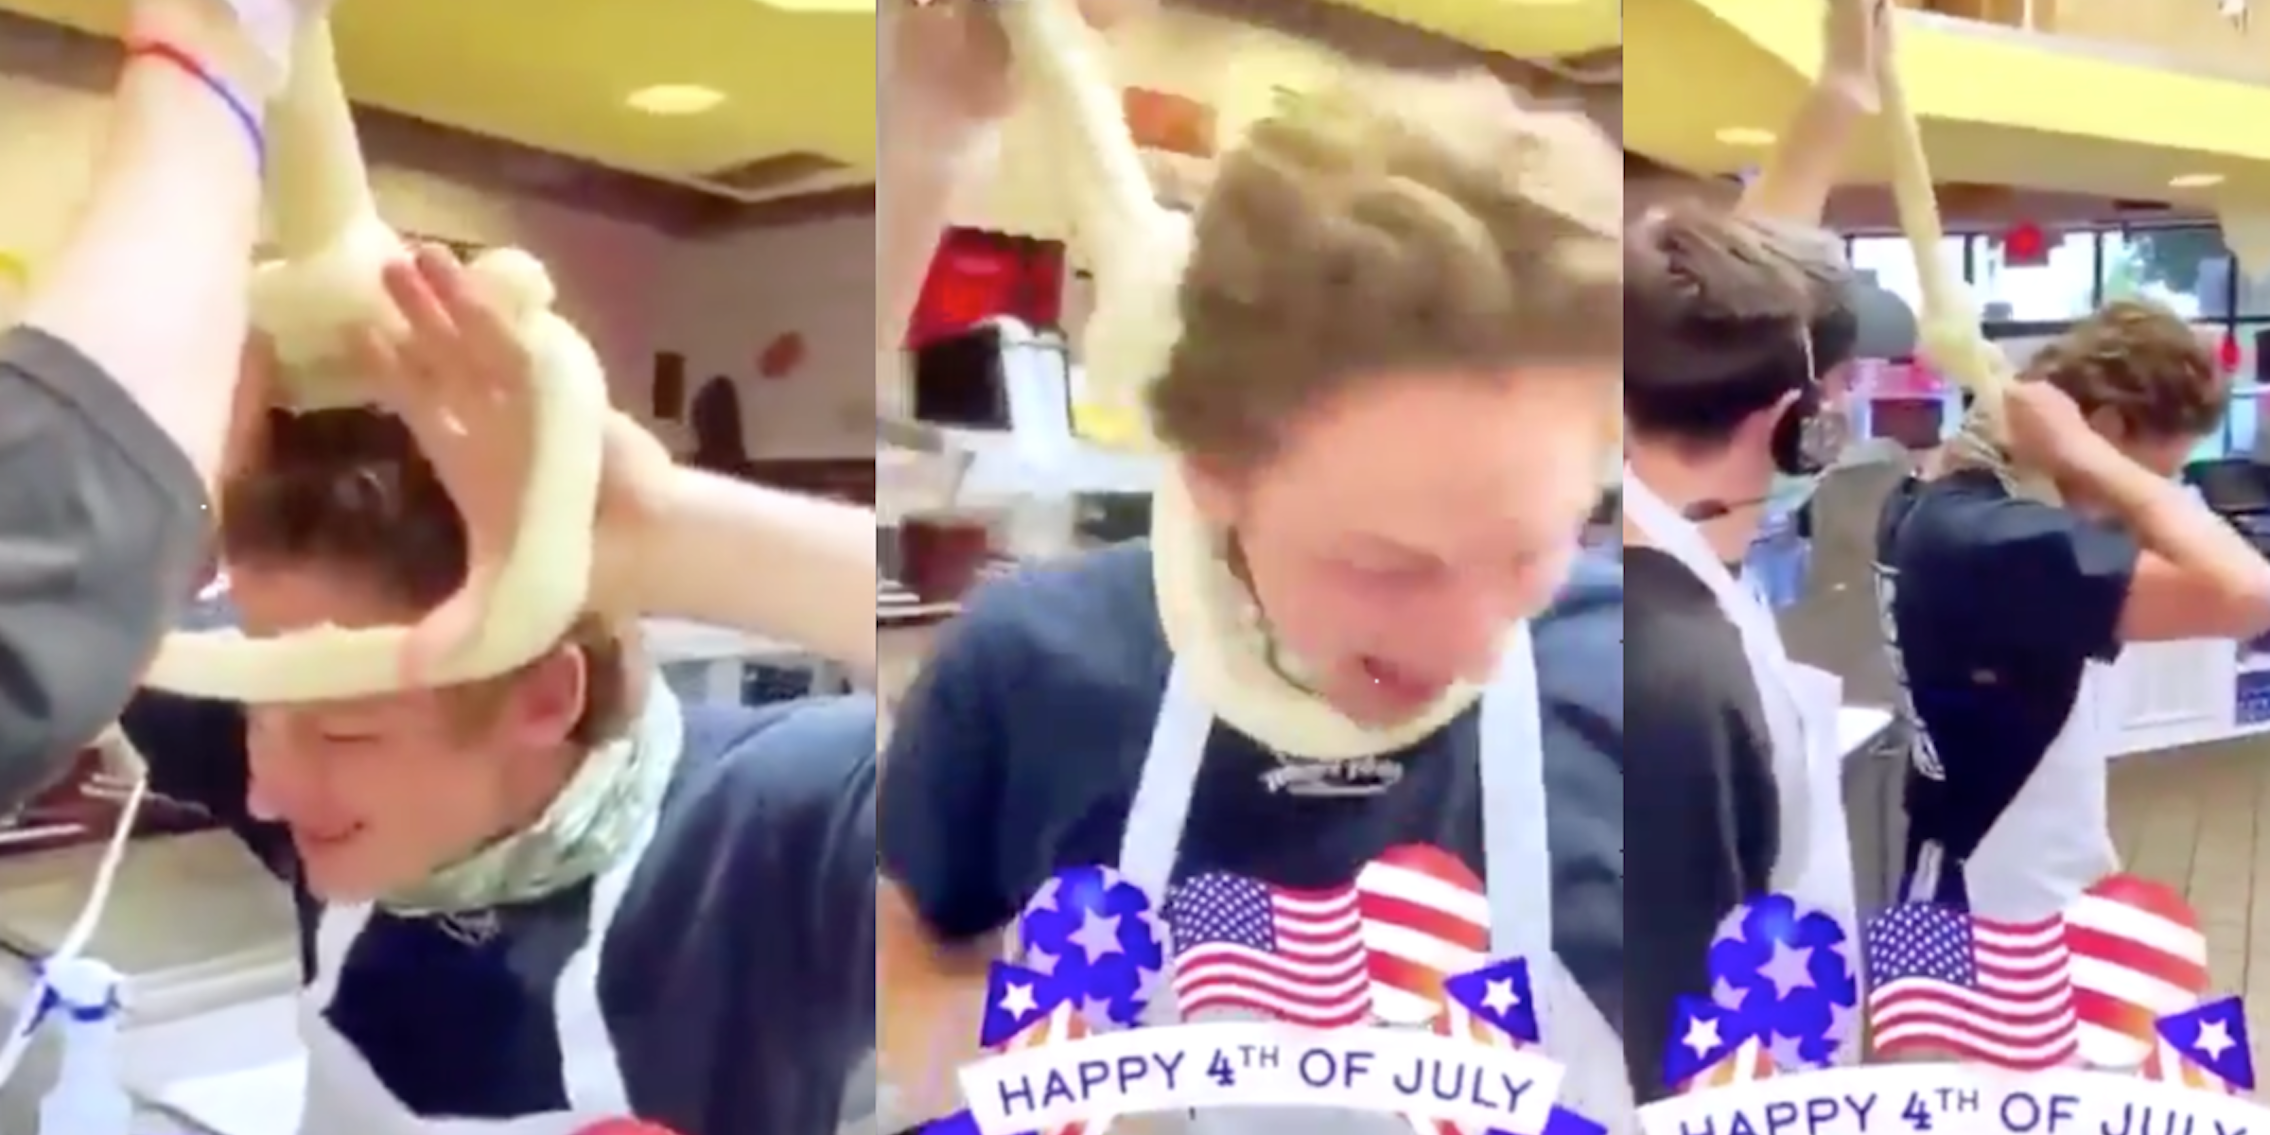 Screenshots show employees playing with a noose made of dough